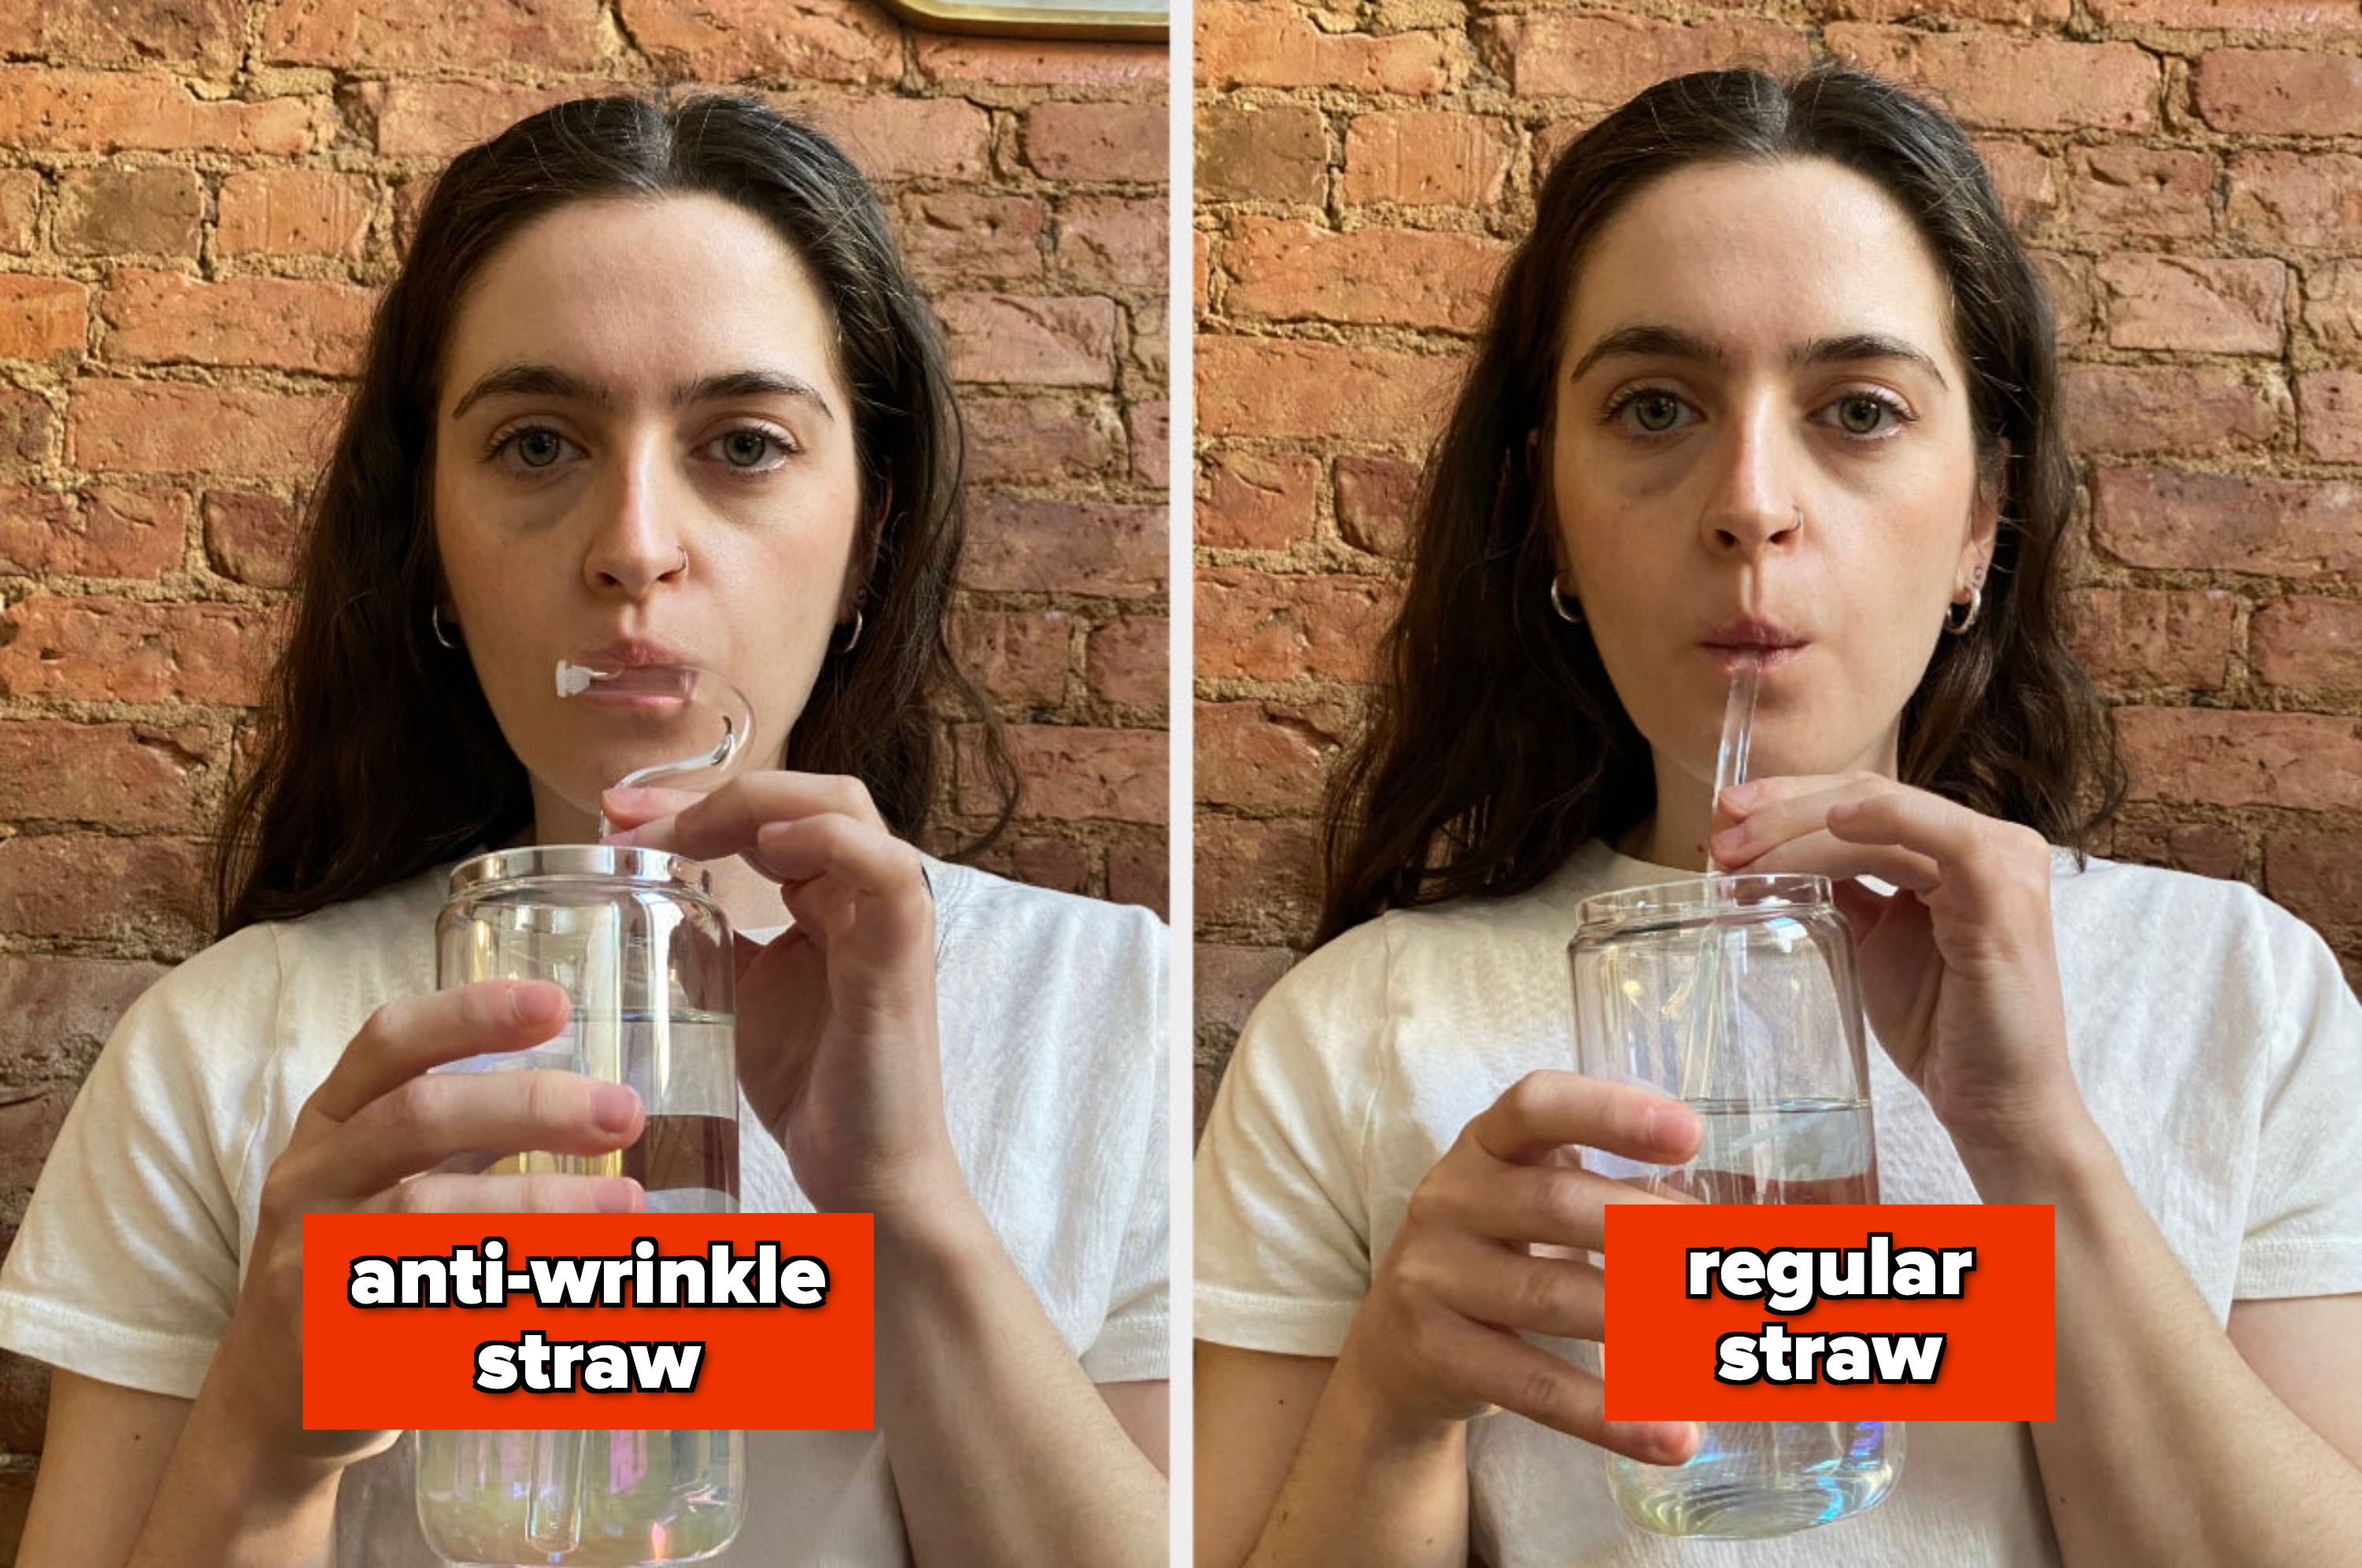 The author using two different straws, one labeled &quot;anti-wrinkle straw&quot; and the other &quot;regular straw.&quot;